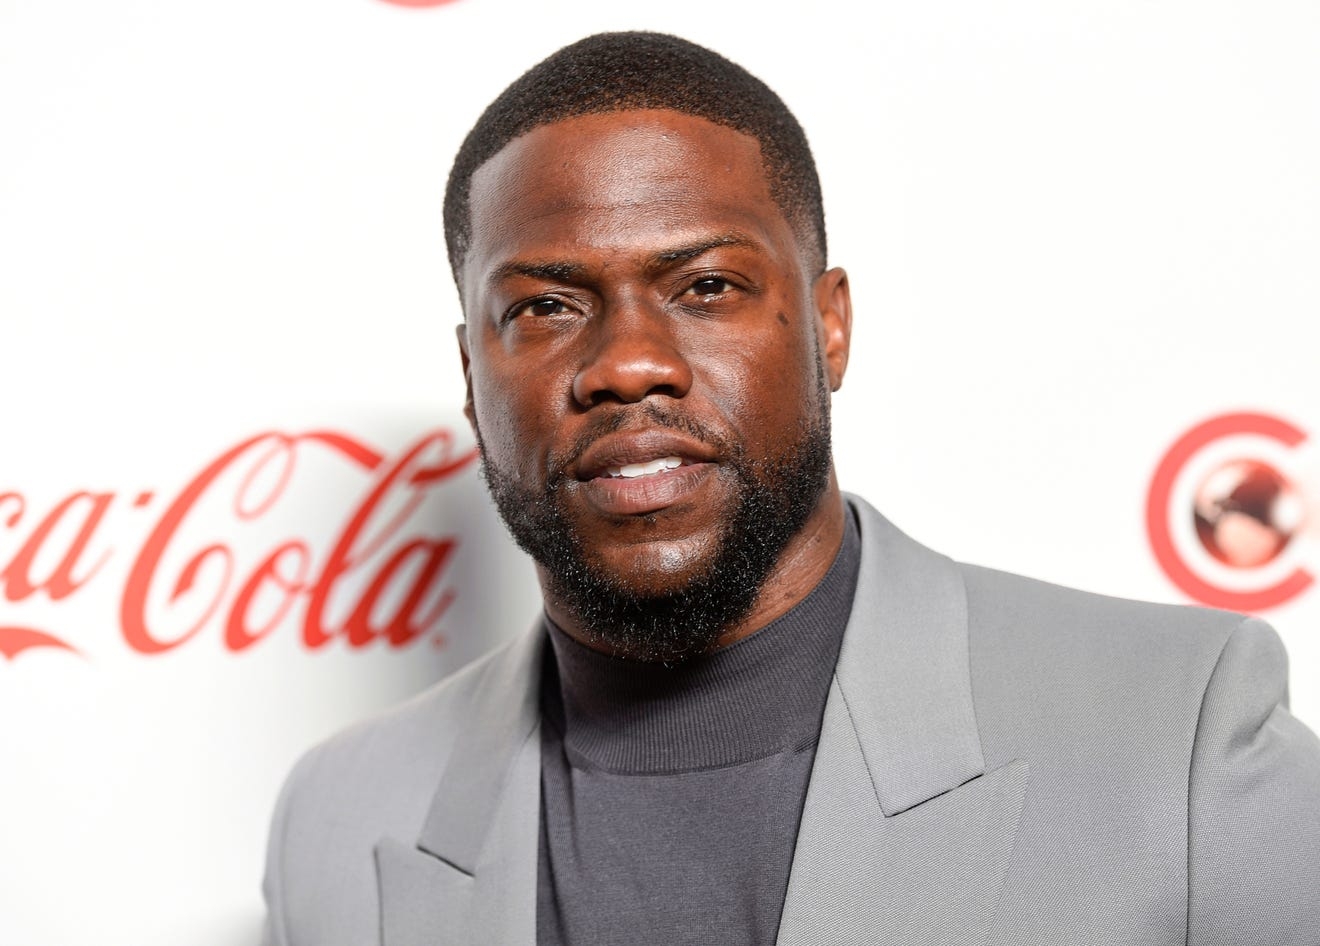 People’s Choice Awards: Kevin Hart makes first major appearance since car crash, shares thanks